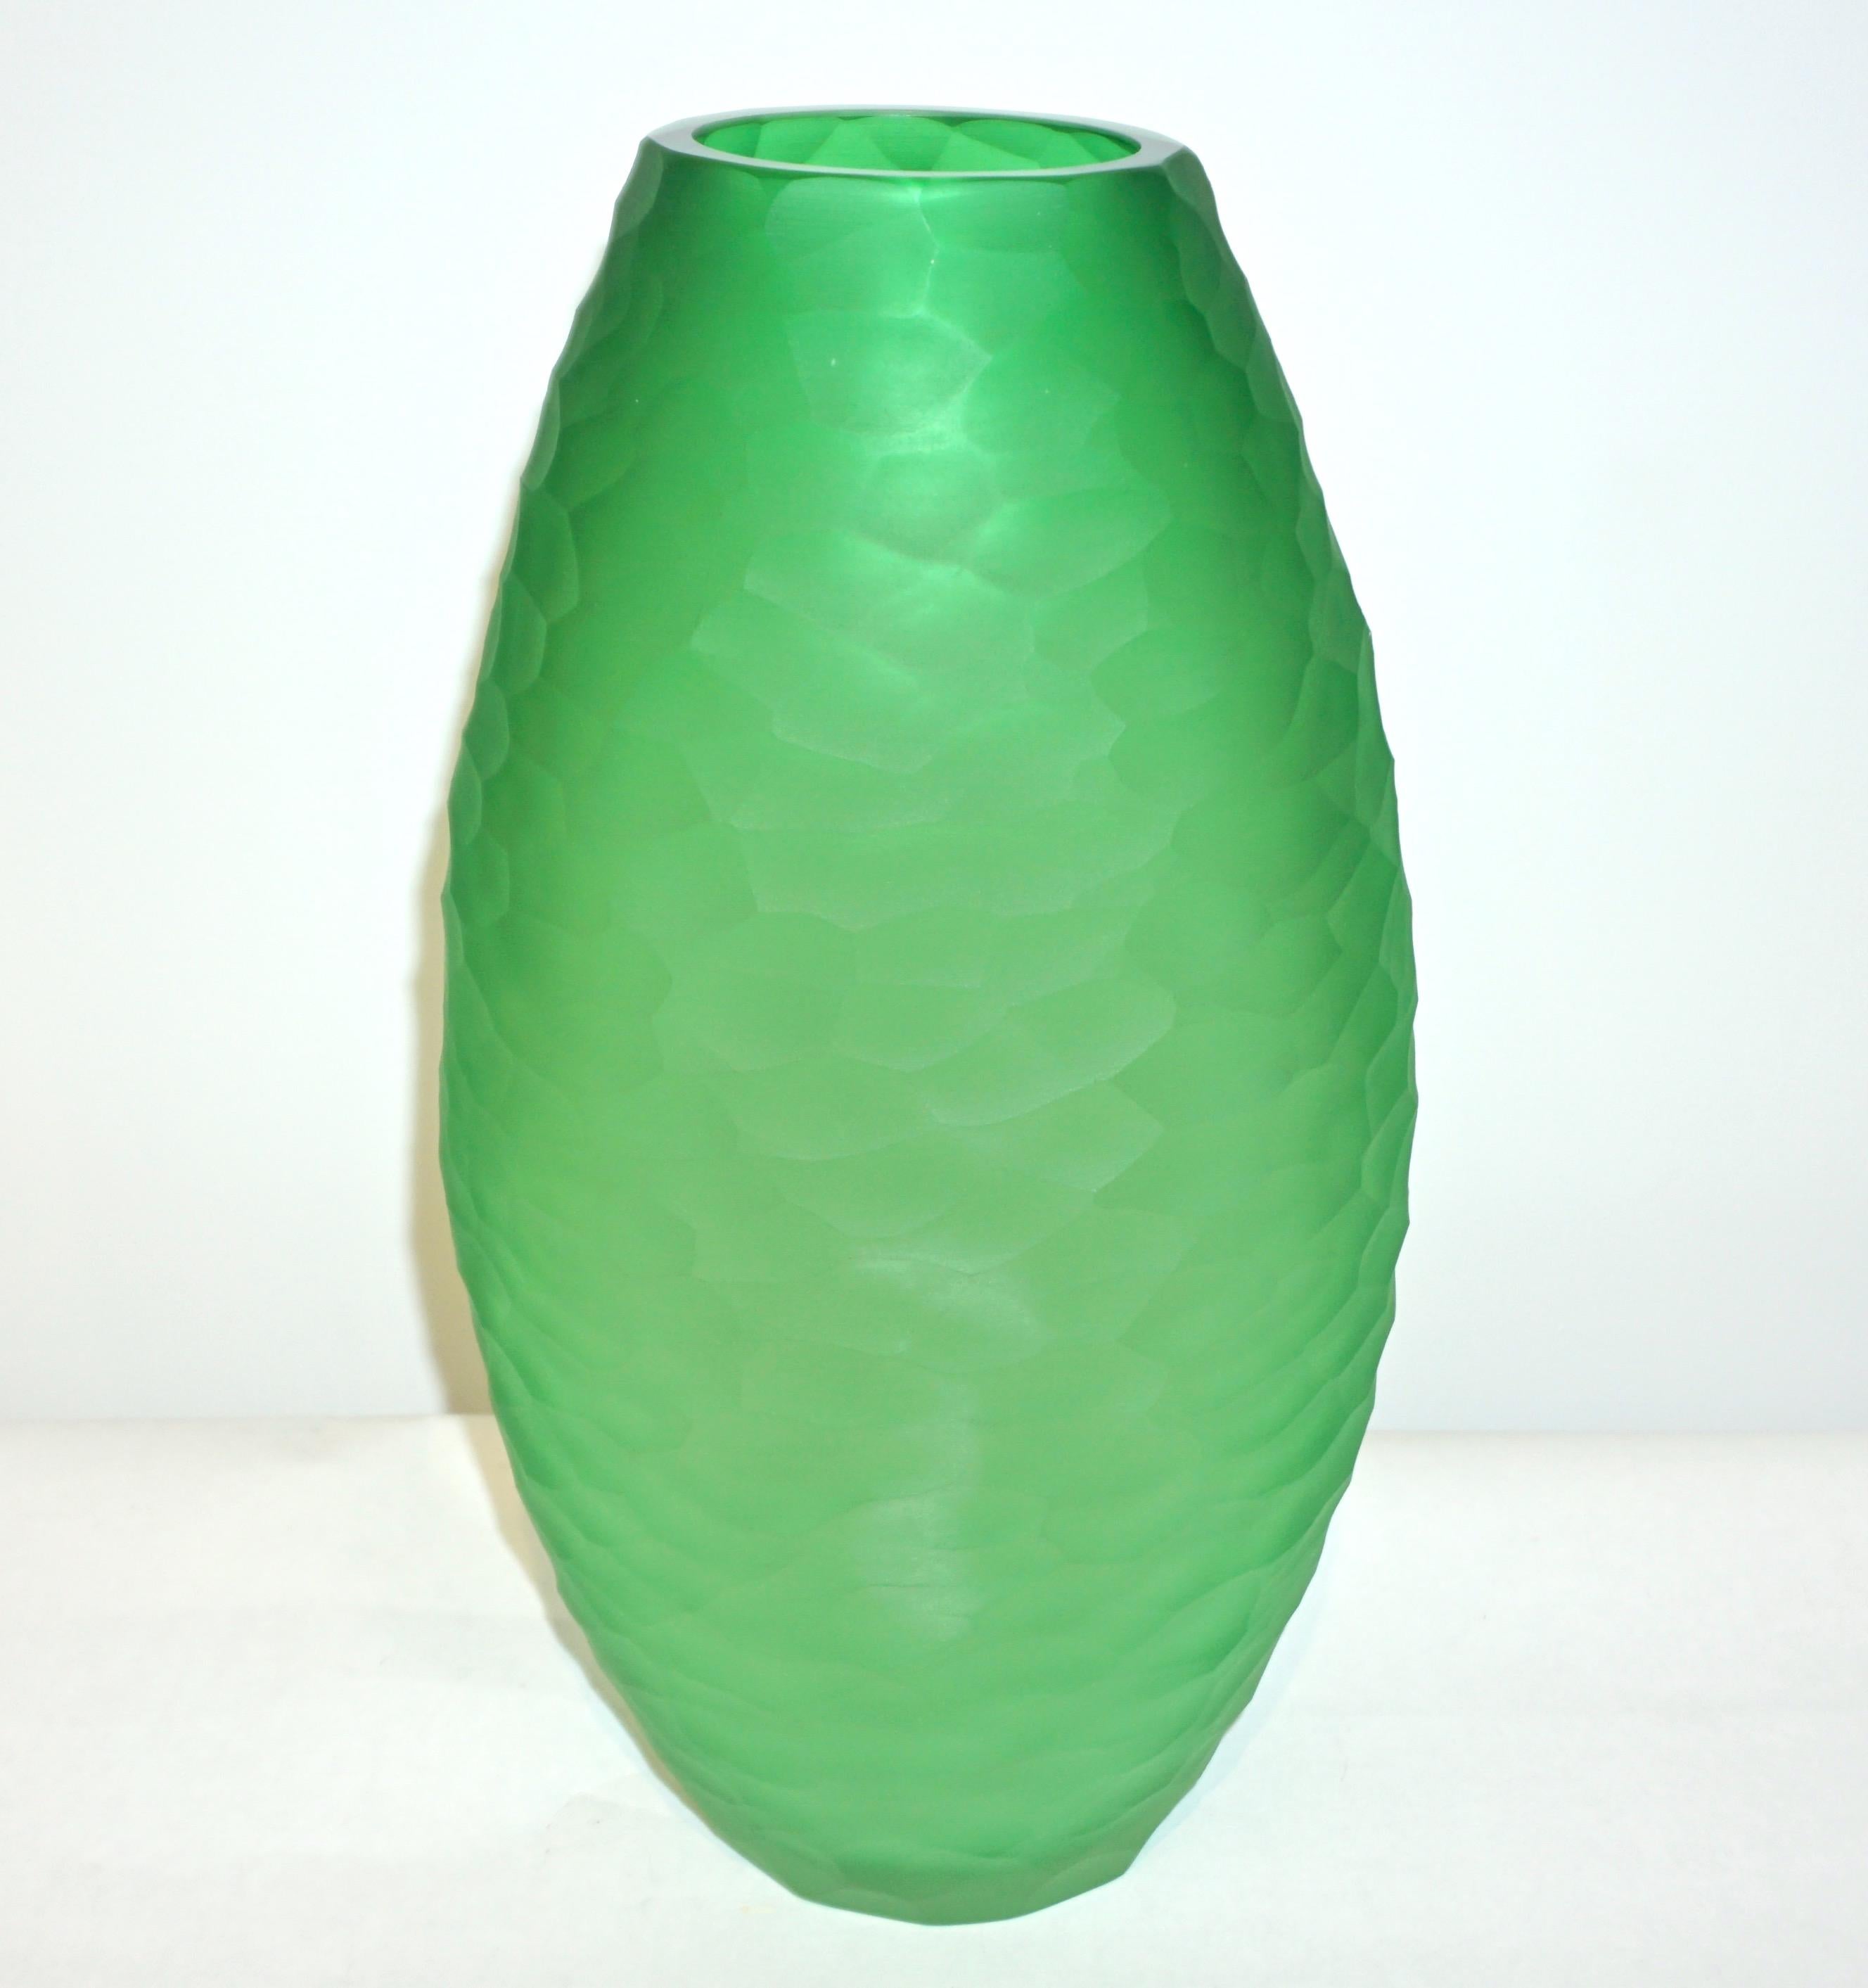 An elegant vase of ovoid shape, in a chic vivid green Murano glass, blown by Vivarini, with a high quality of decoration in a precious small battuto on the entire surface, hand chiseled while the glass is still hot, executed by the artist Schiavon.